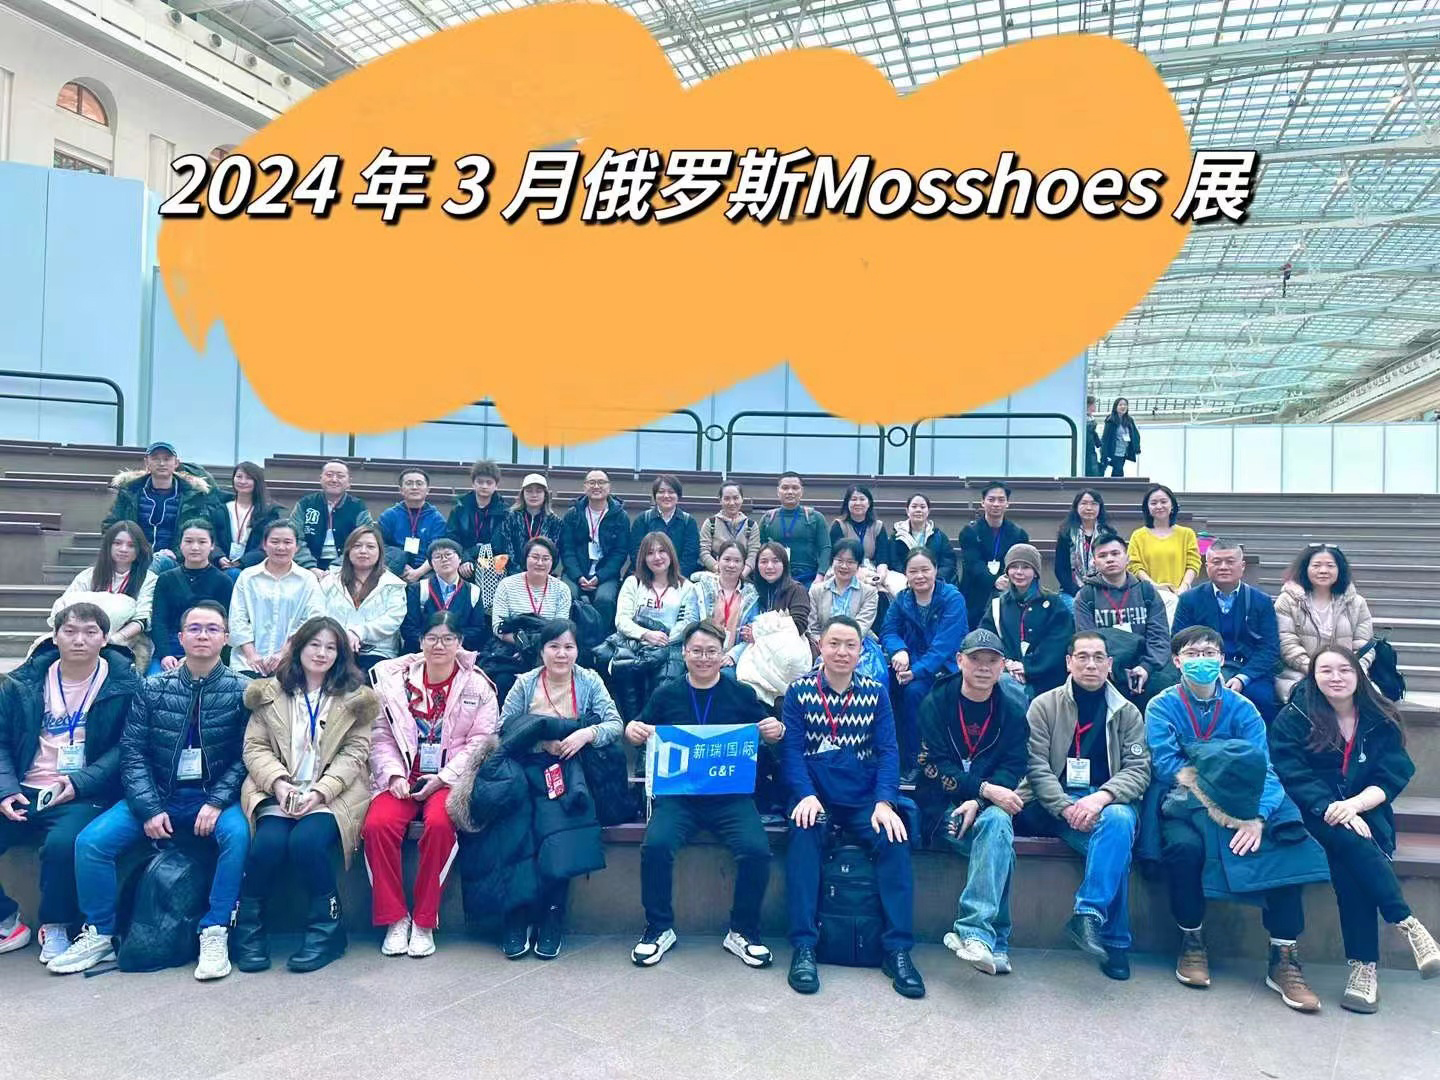 The Russian MOSSSHOES exhibition will be a groundbreaking event and the organizers are looking forward to full orders from eager participants.